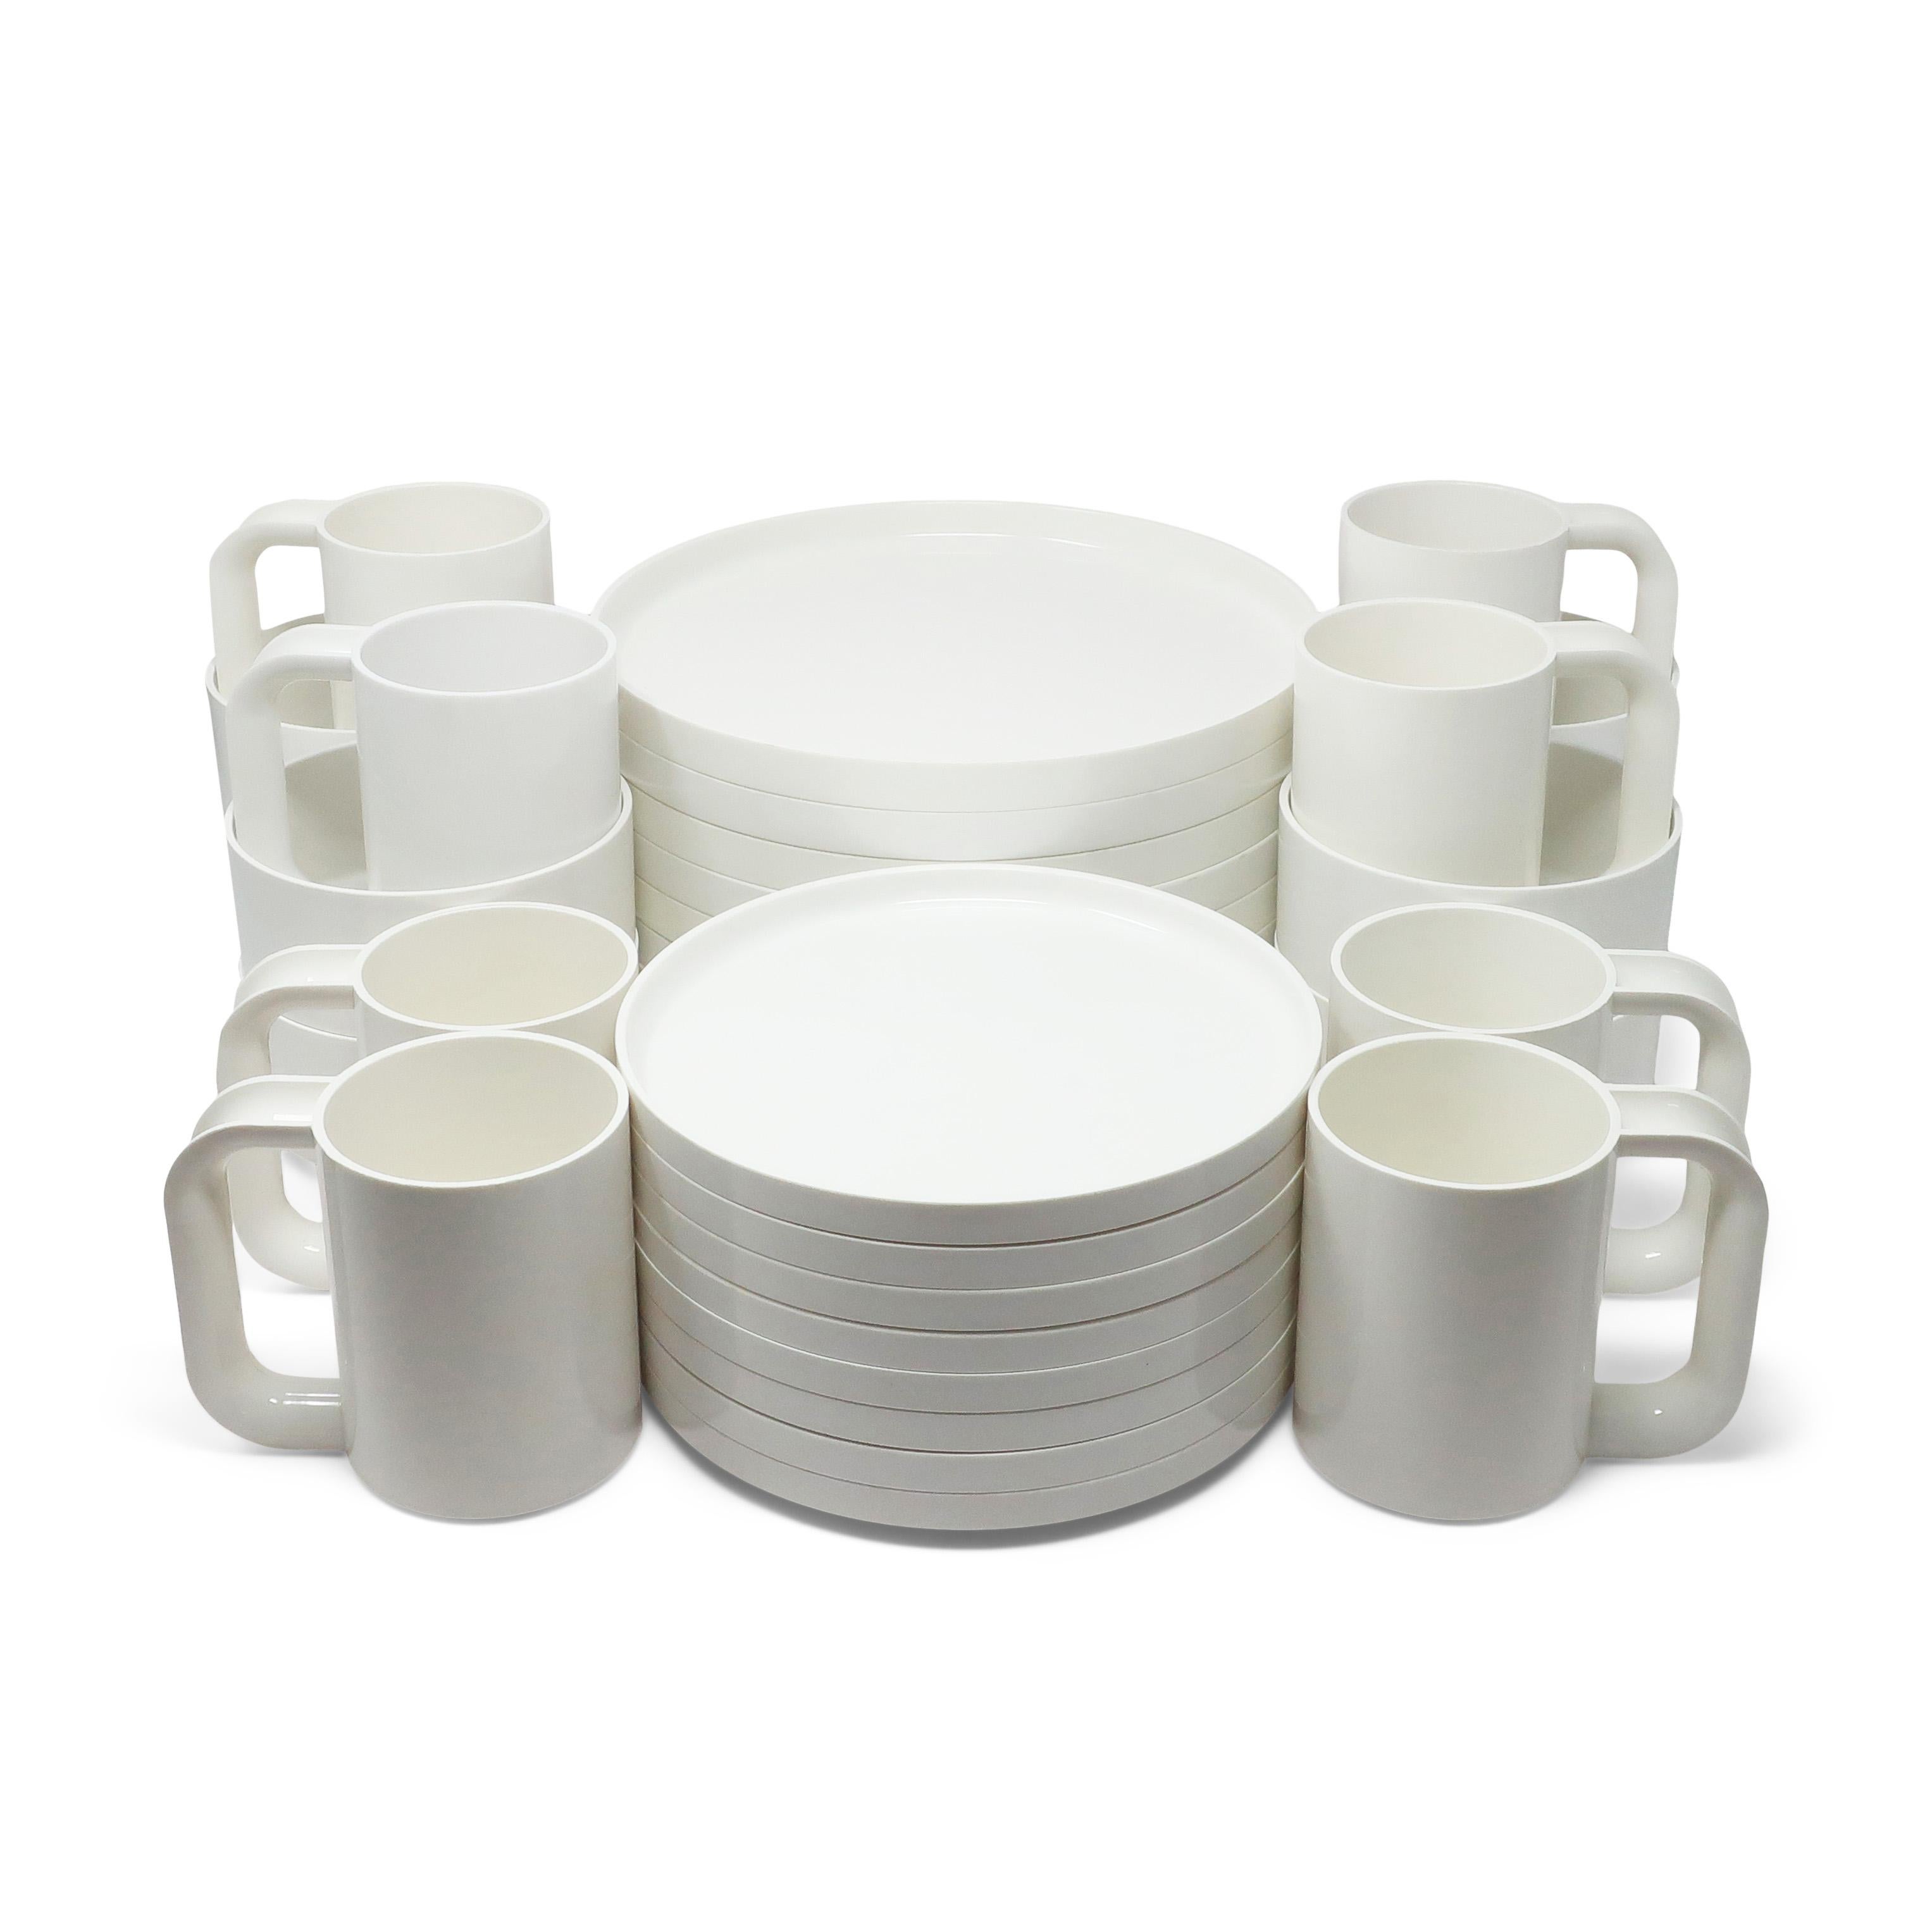 White Dinnerware by Vignelli for Heller - Set of 32 In Good Condition For Sale In Brooklyn, NY